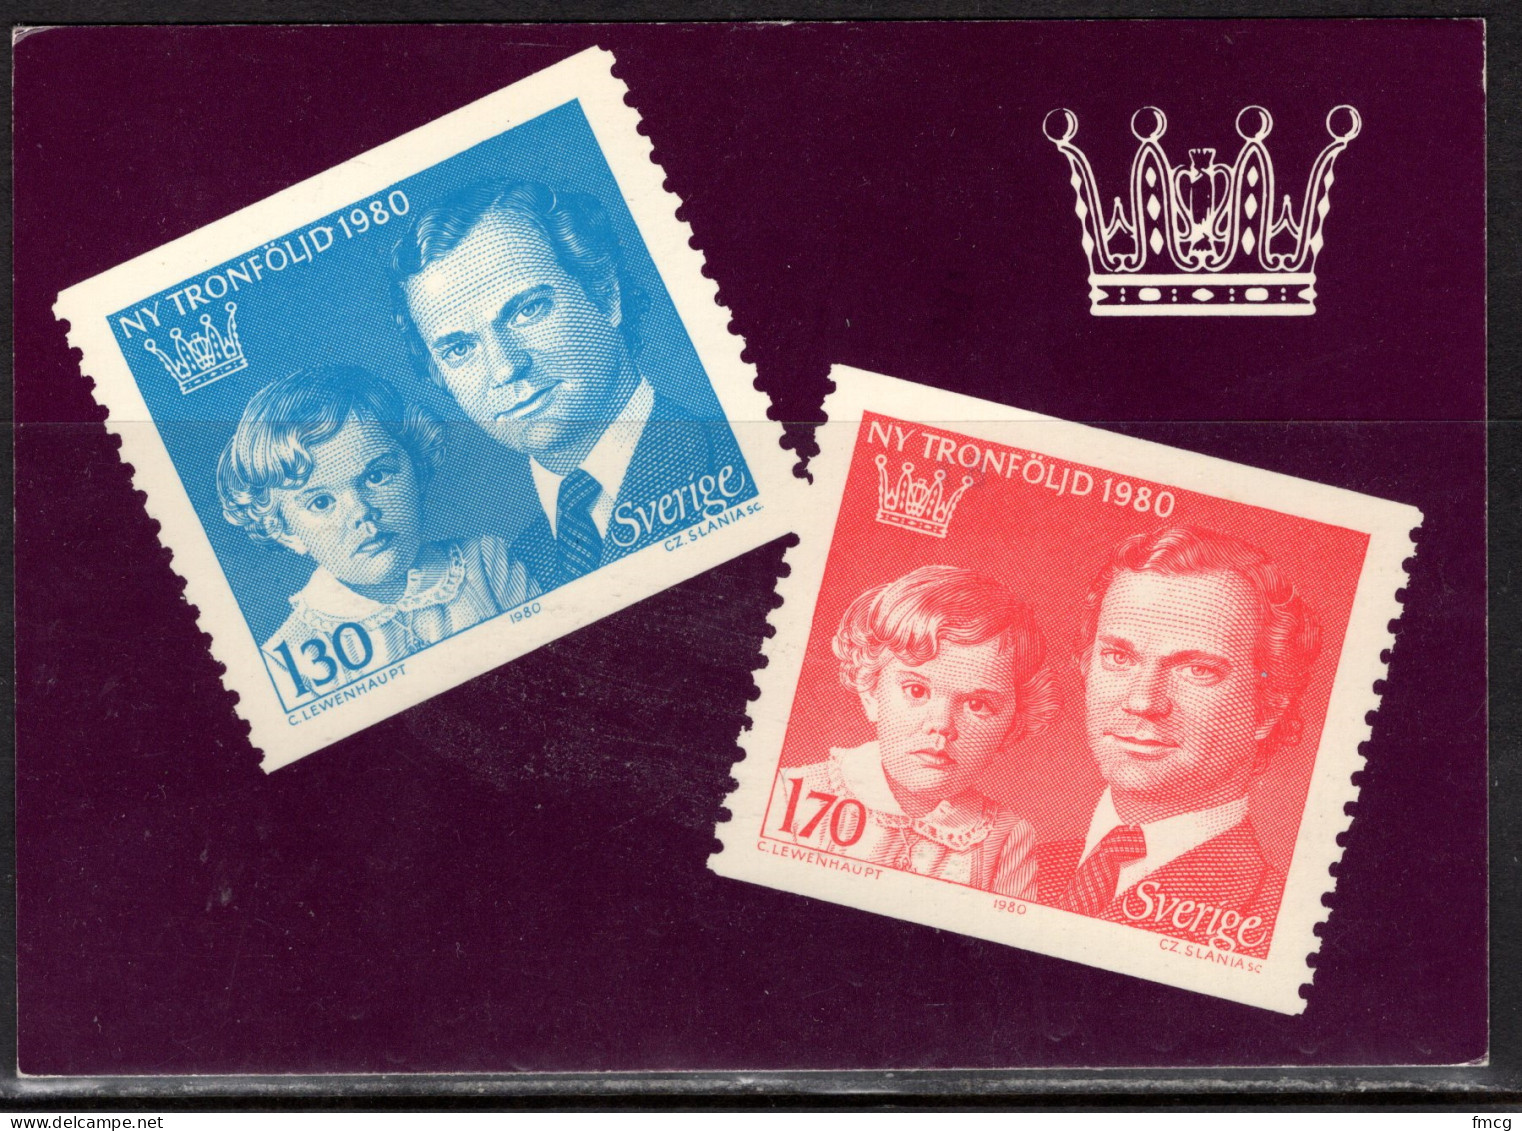 1980 Sweden Stamps, London, Mailed From Sweden - Sellos (representaciones)